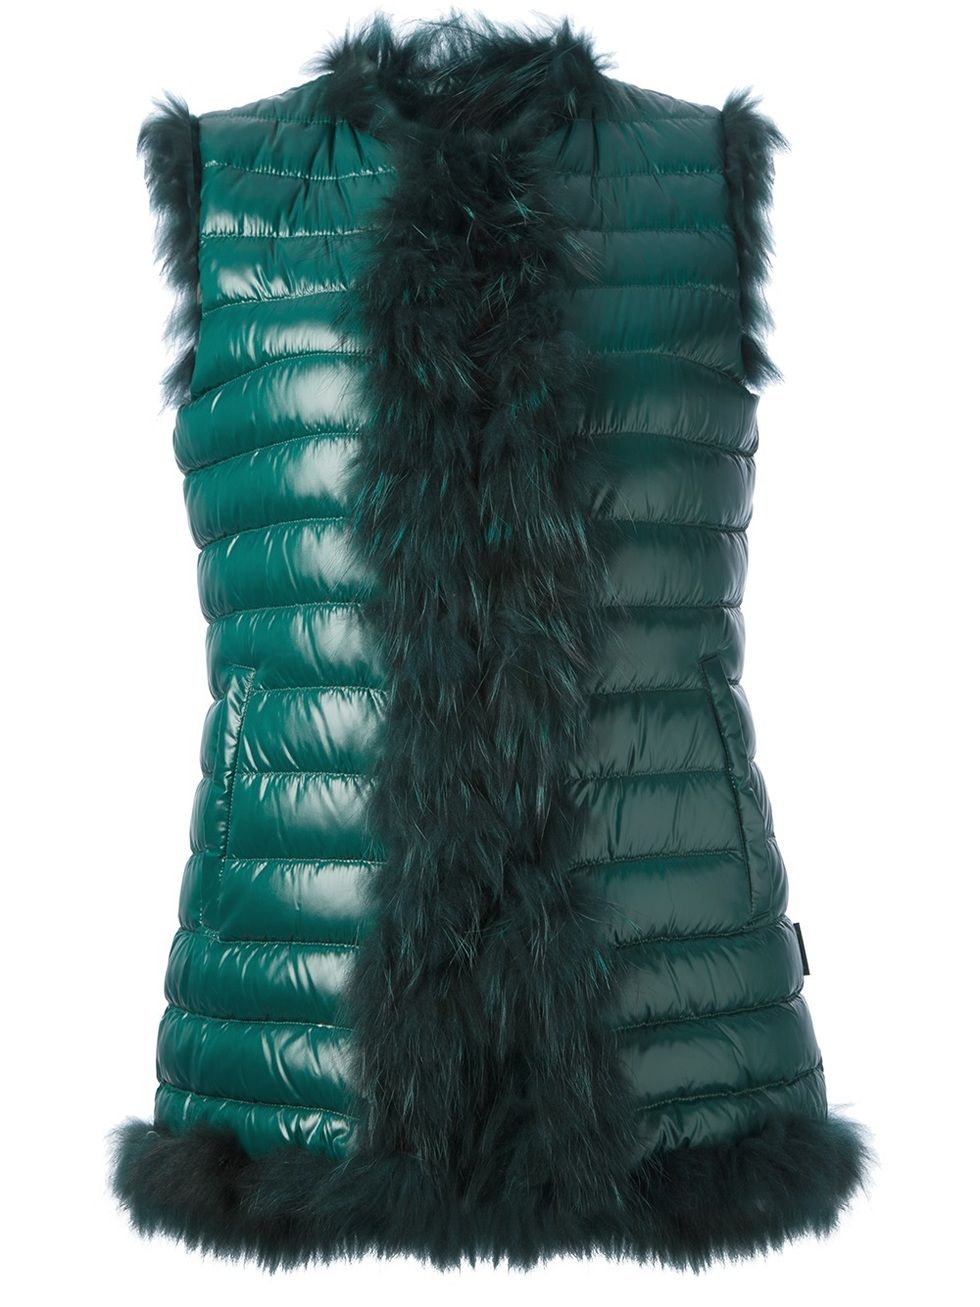 Blue, Green, Costume accessory, Teal, Turquoise, Natural material, Fur, Fur clothing, Animal product, 